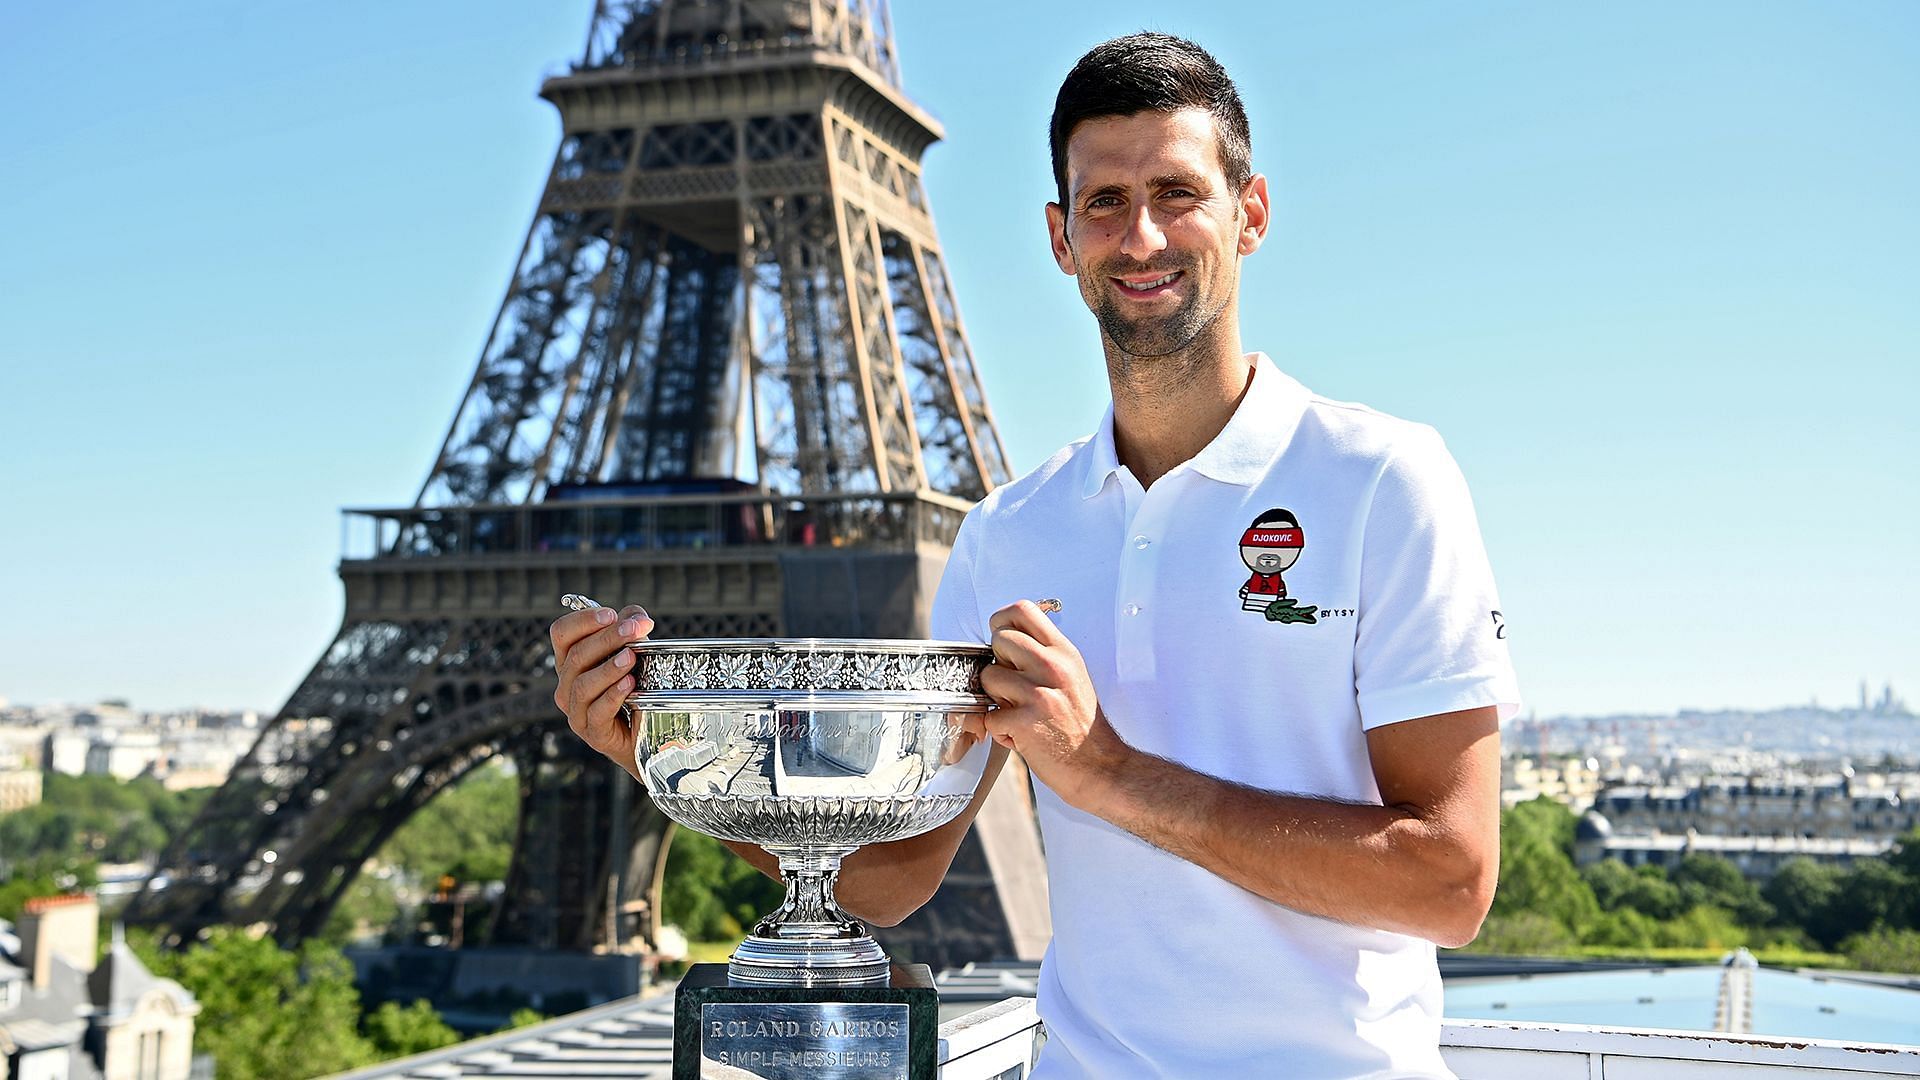 Novak Djokovic, Ons Jabeur, and other PTPA Player Committee members have mini reunion ahead of French Open